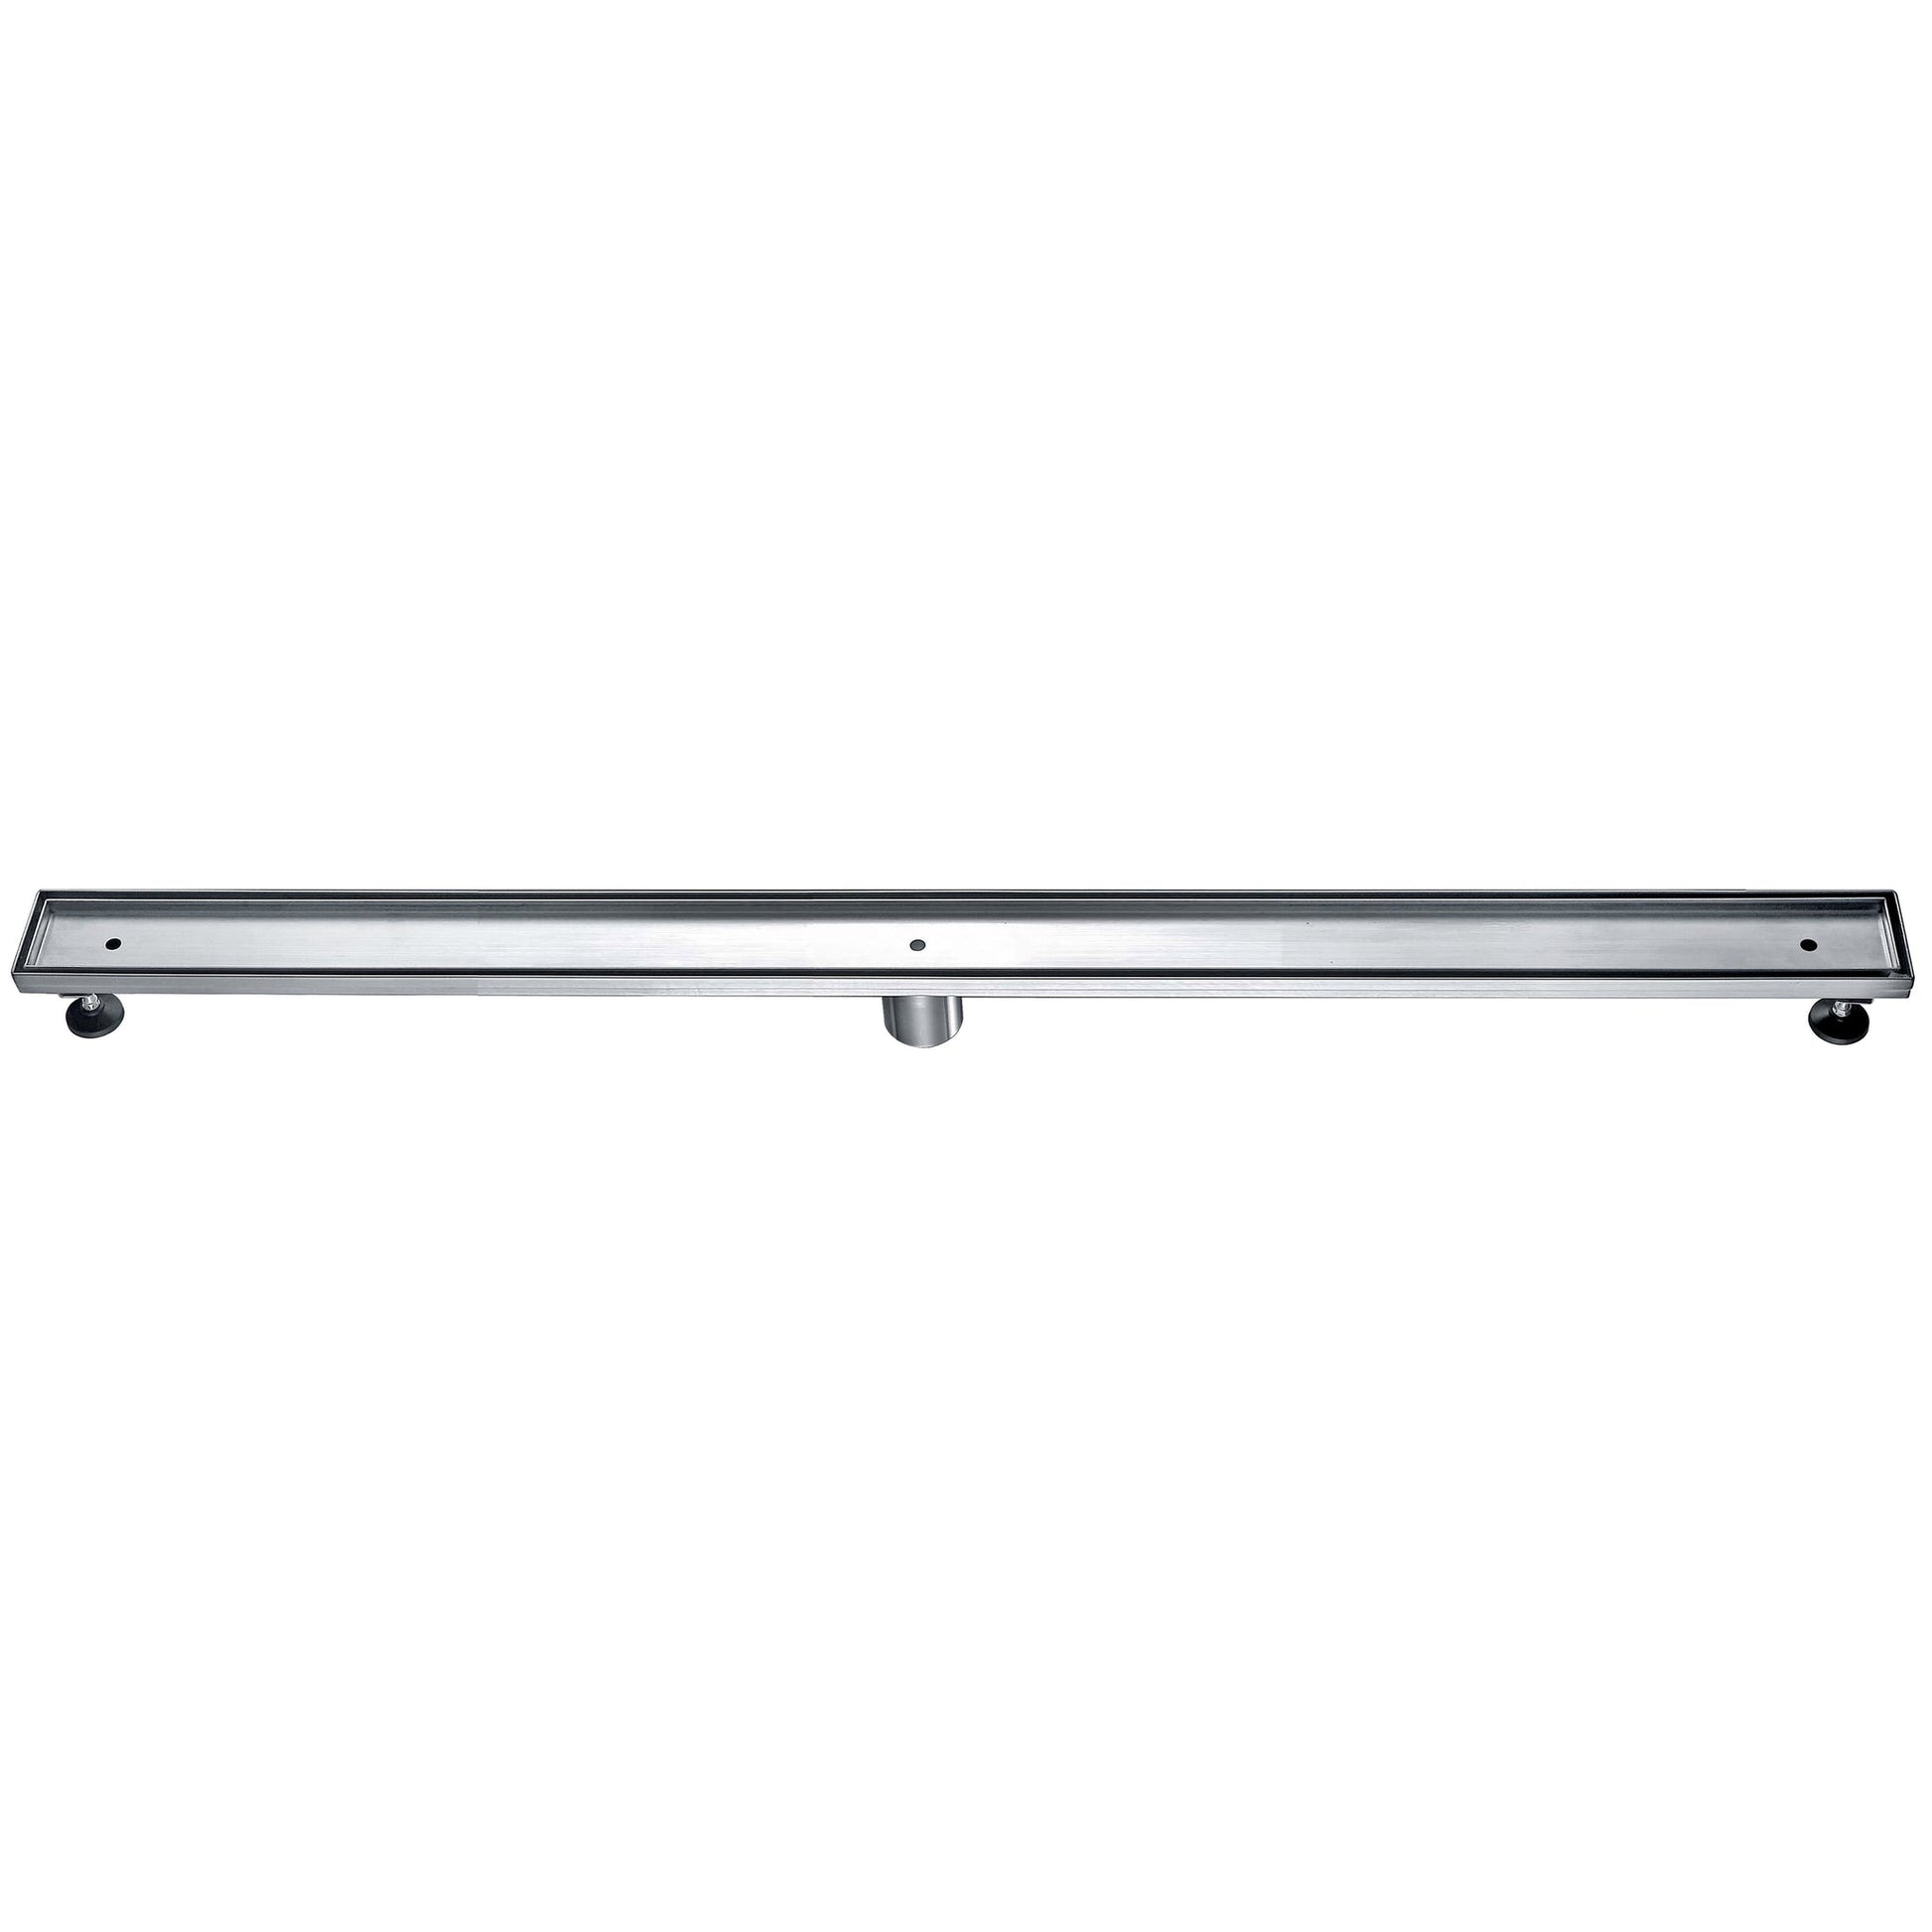 ALFI Brand ABLD47A 47" Brushed Stainless Steel Rectangle Linear Shower Drain Without Cover